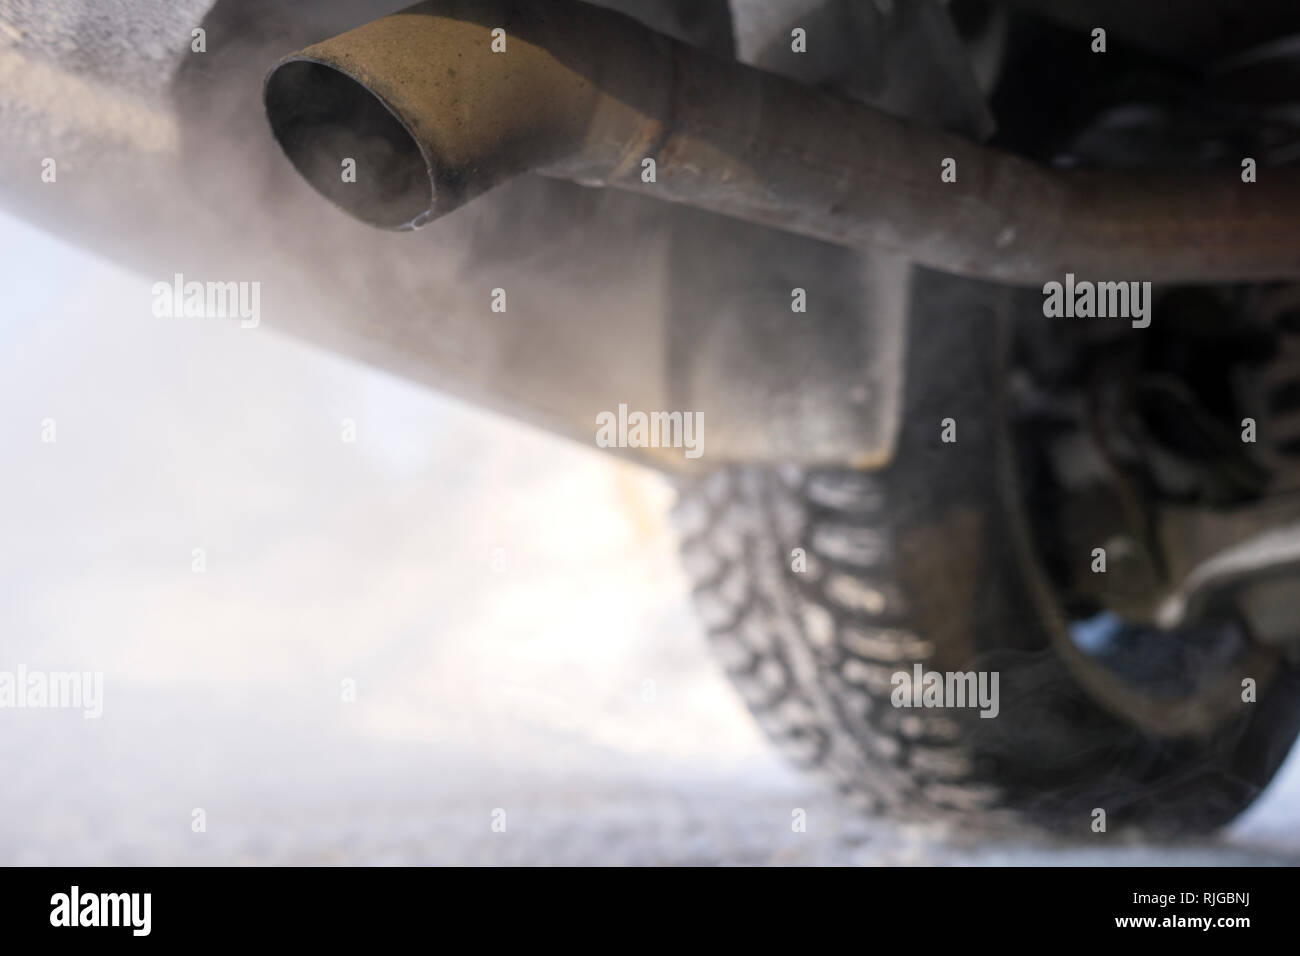 Exhaust pipe, close-up Stock Photo